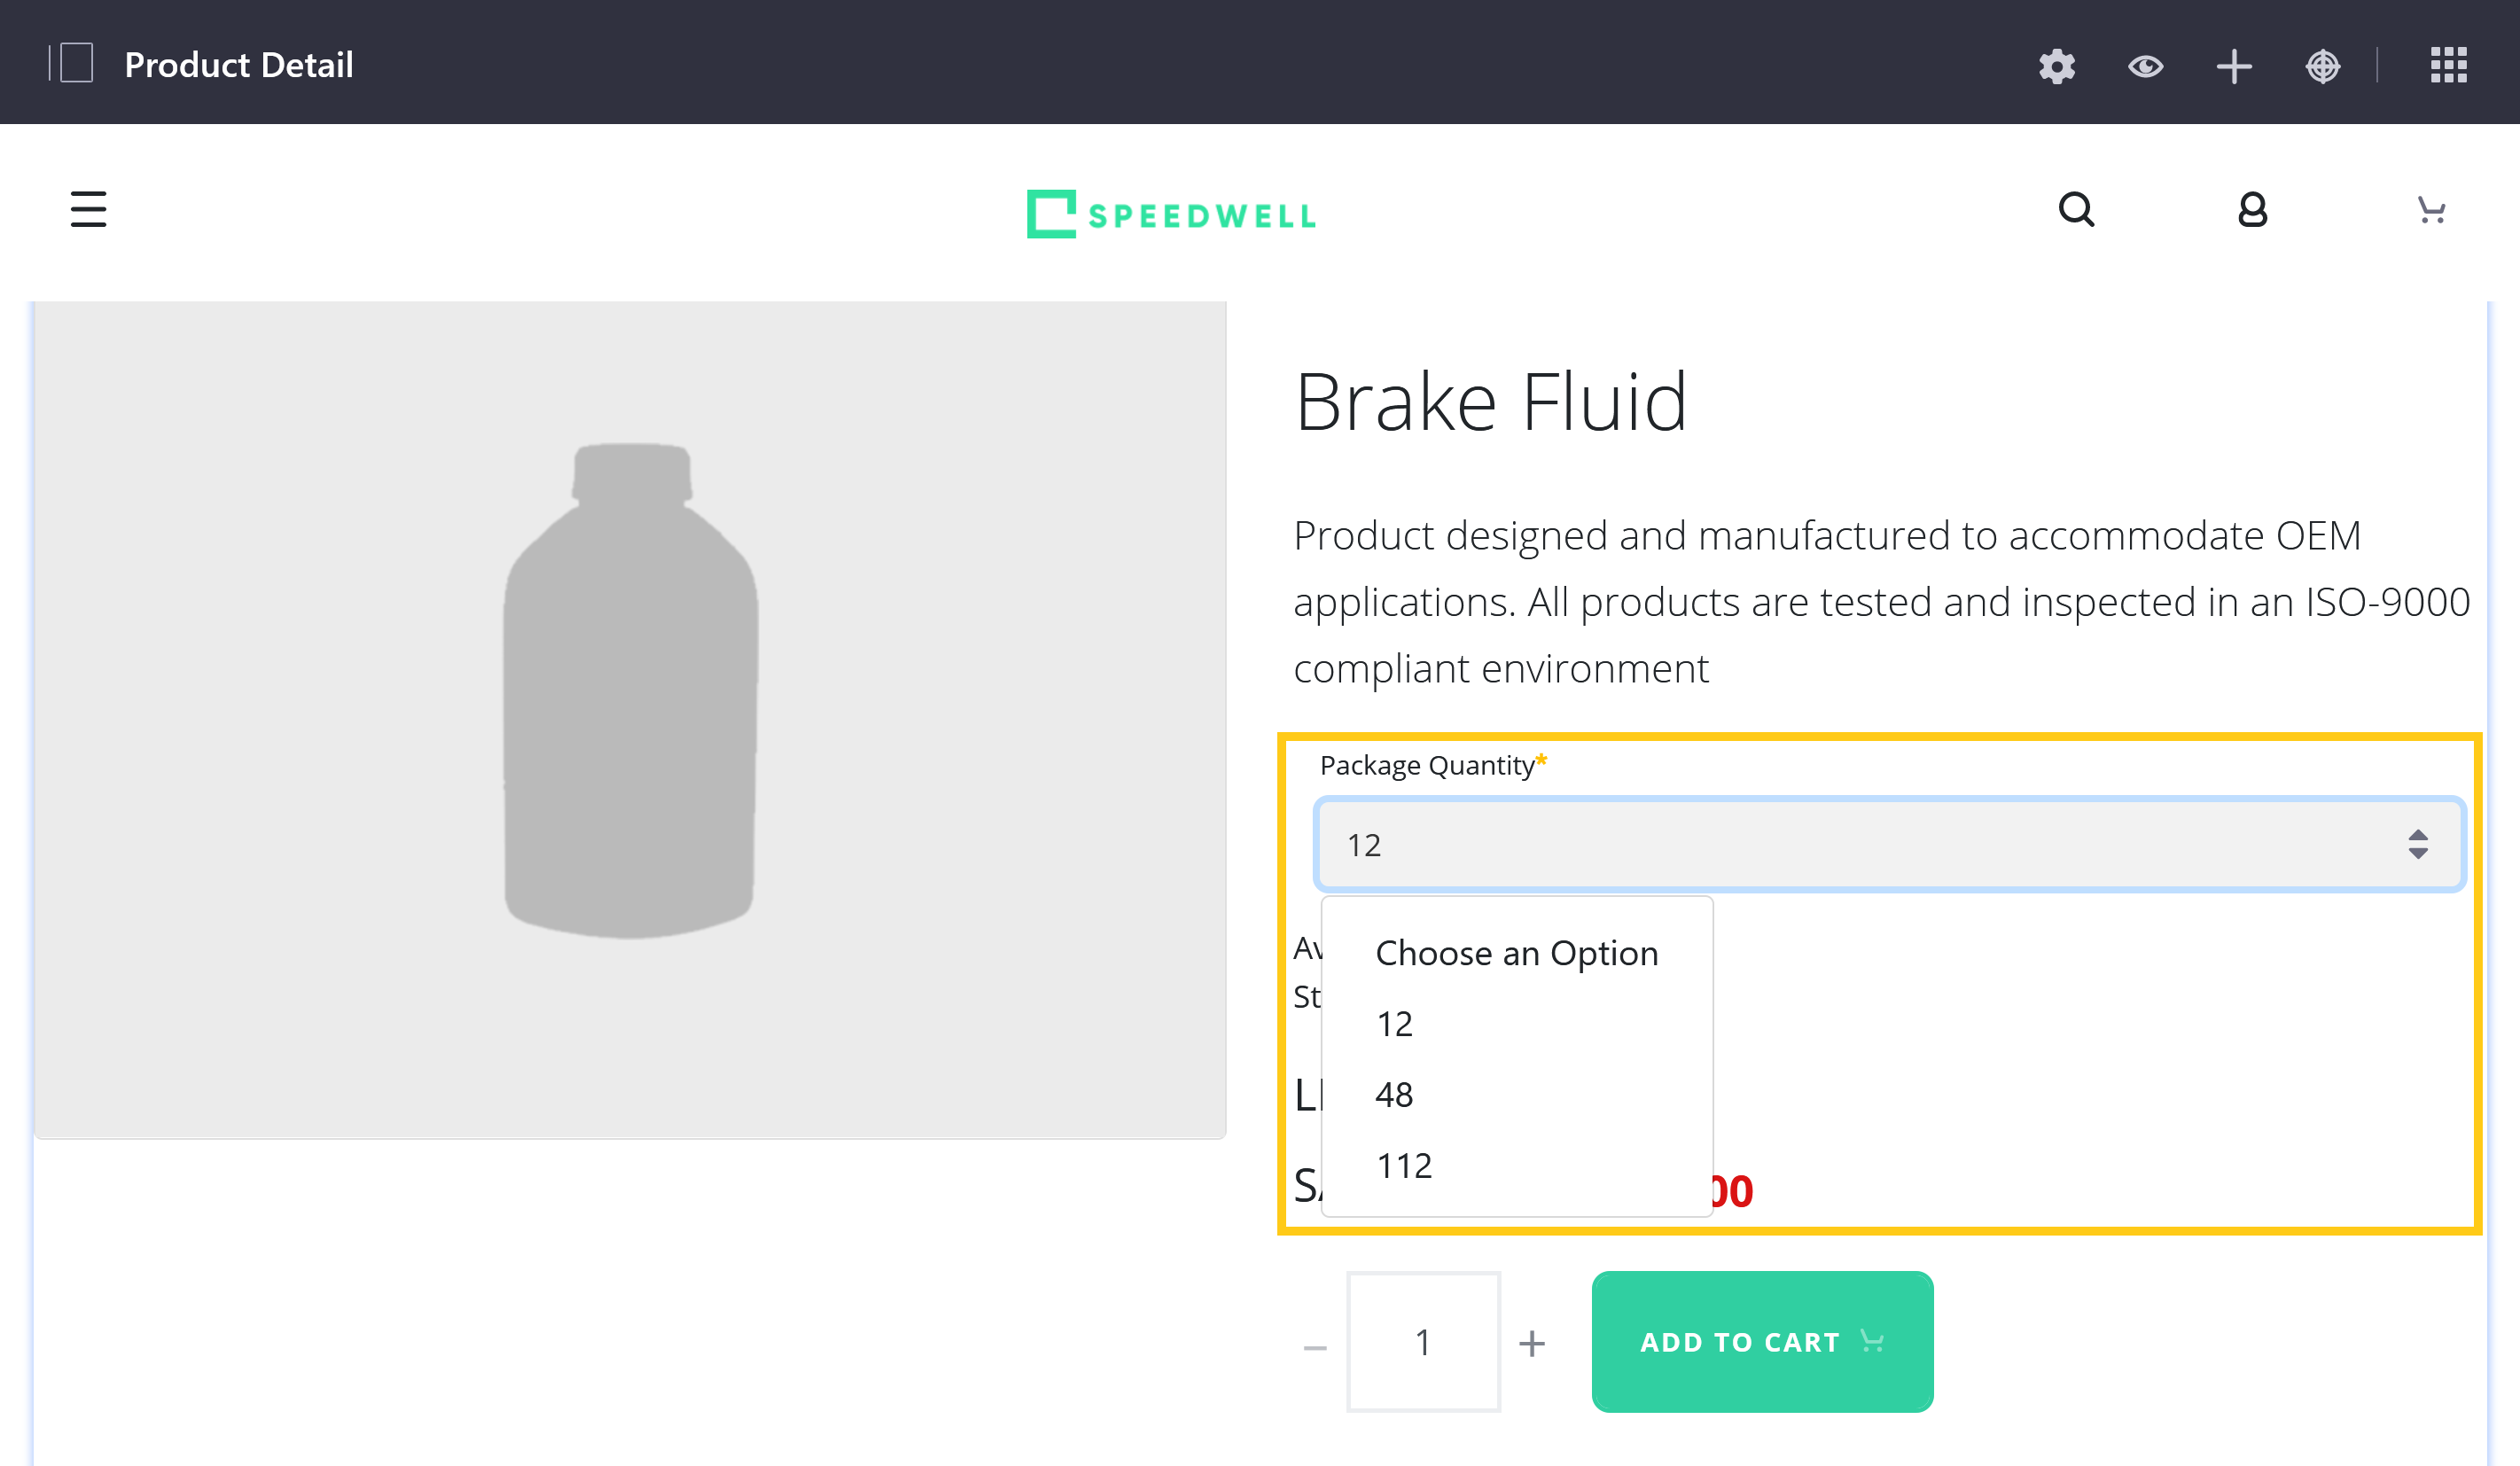 Customers can view and use the Option field in the Product's display page.